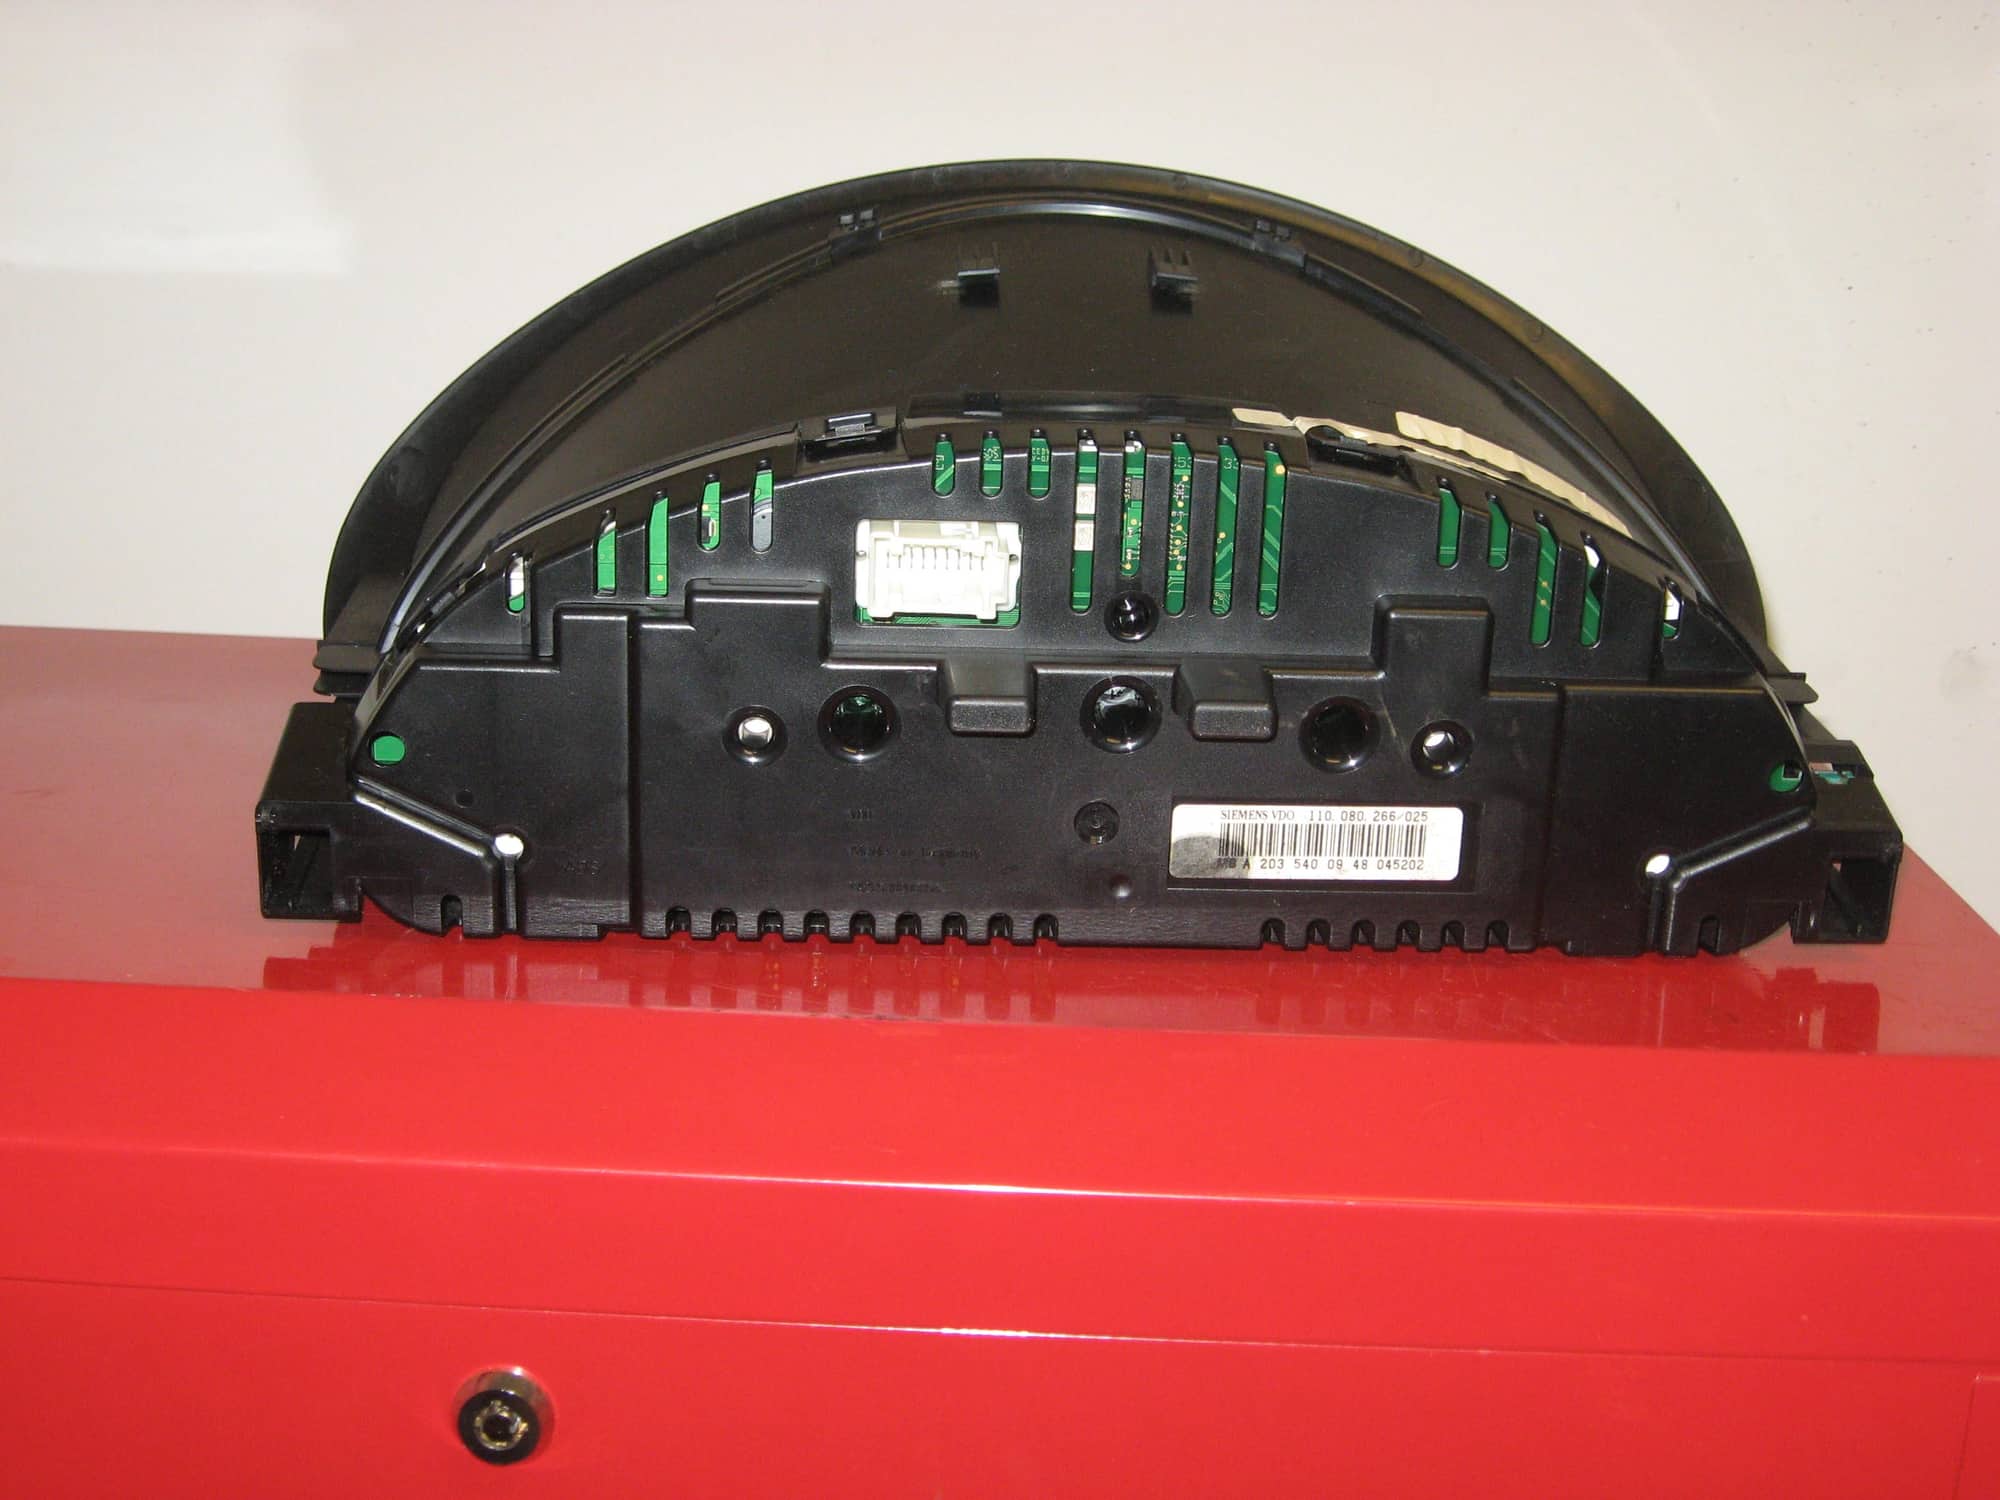 2005 C230 Instrument Cluster Can Be Adapted to Work in